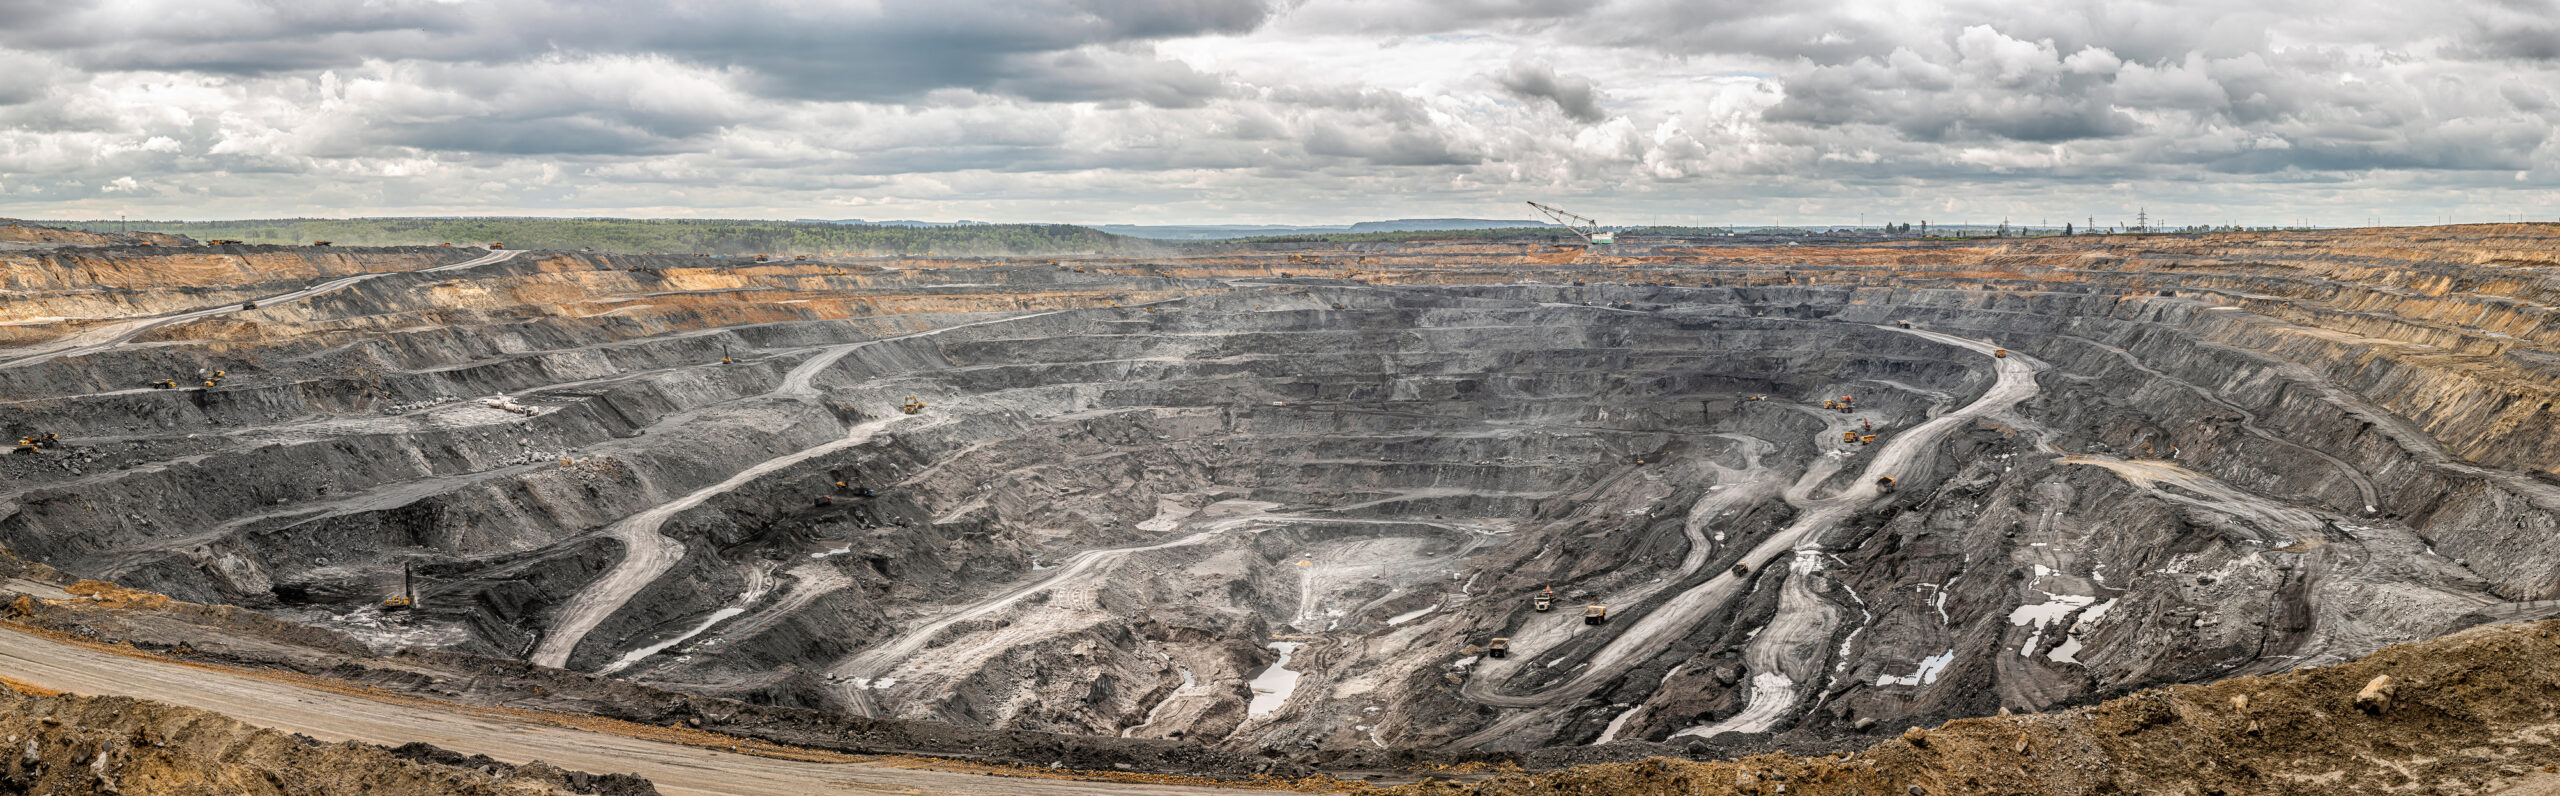 Effective Asset Management: The Mining Industry’s Key to Meeting our Demand for Critical Minerals in a Green Future